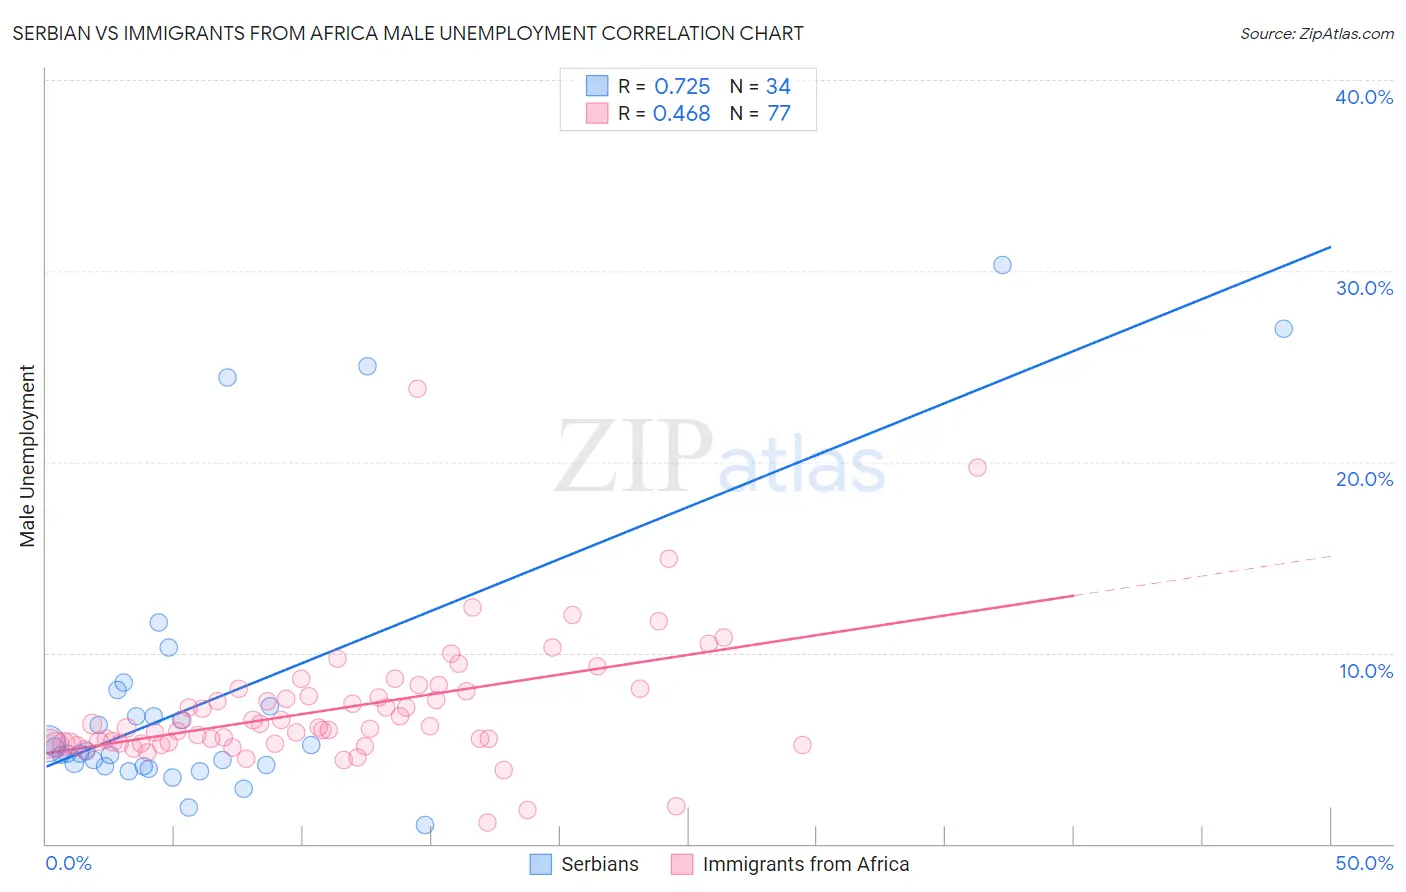 Serbian vs Immigrants from Africa Male Unemployment